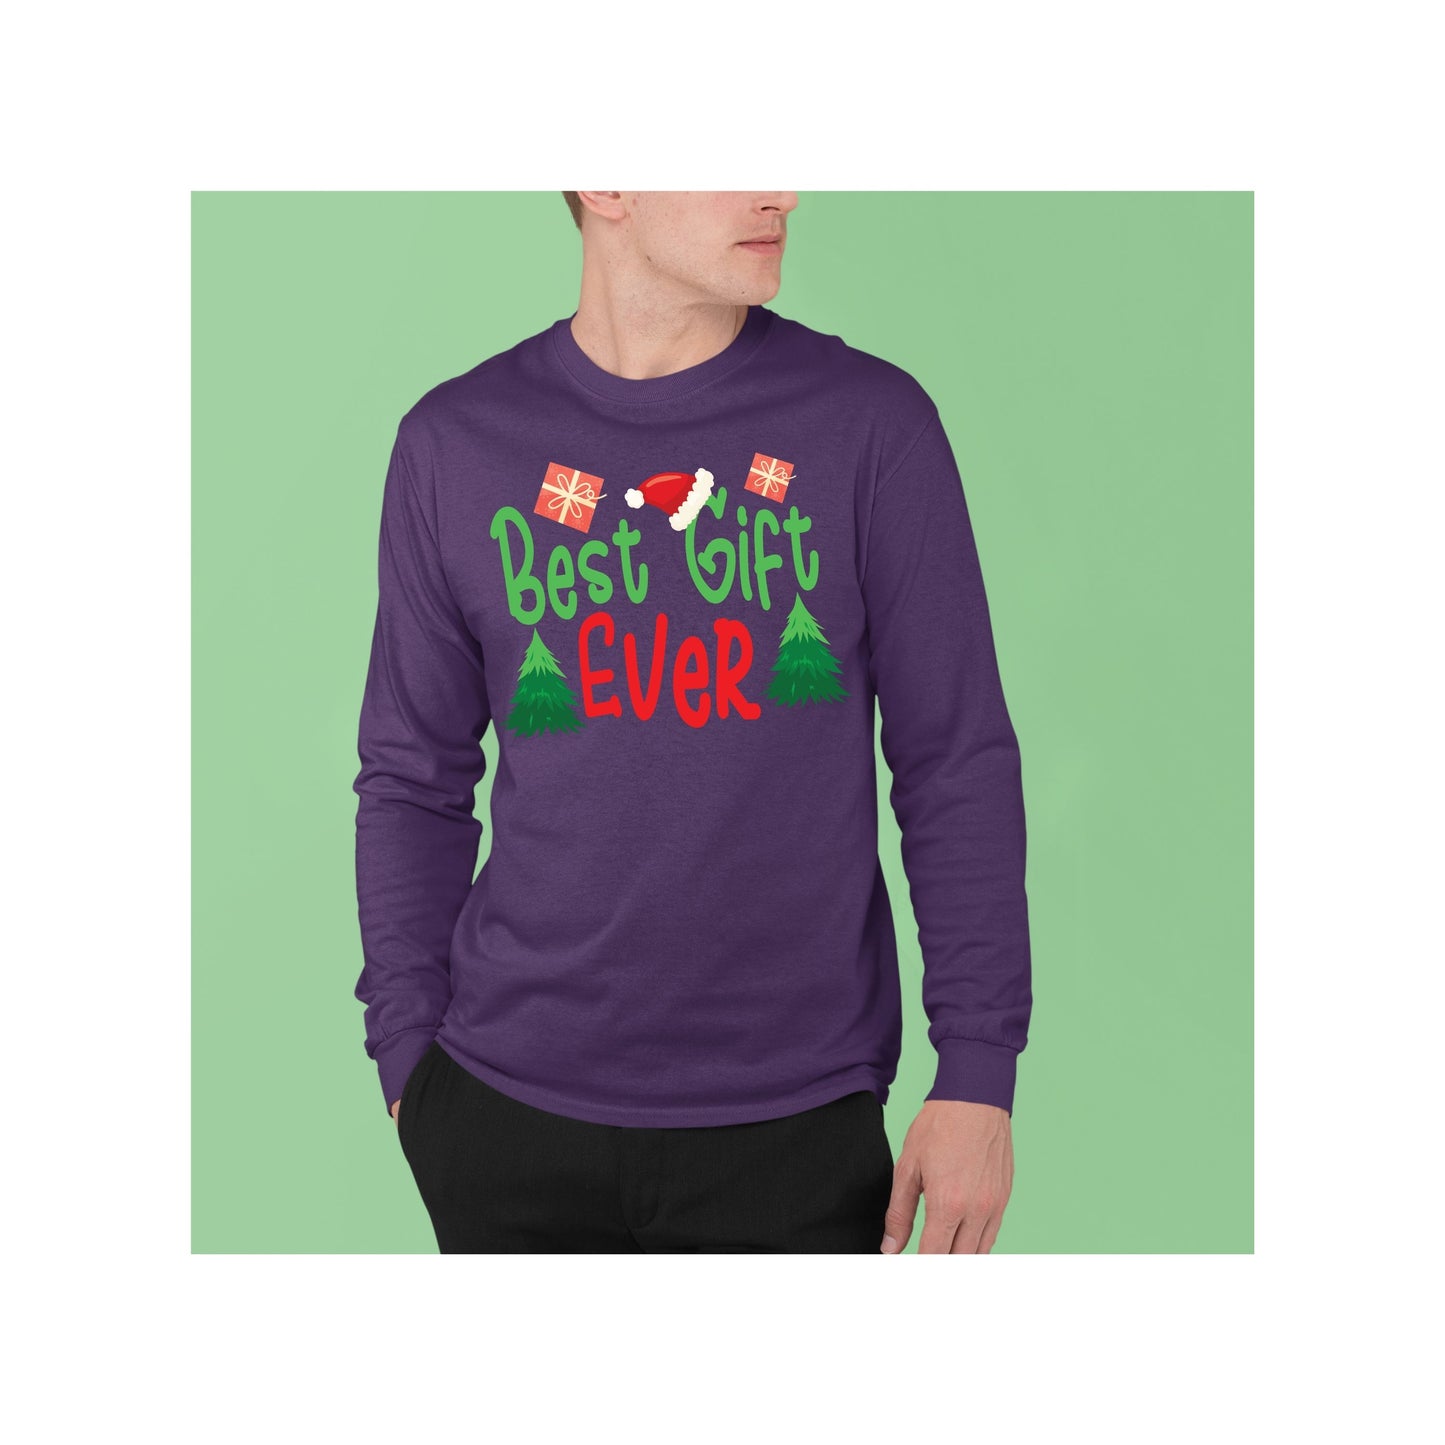 Best Gift Ever, Christmas Crewneck For Men, Christmas Long Sleeves, Christmas Sweatshirt, Christmas Sweater, Christmas Present